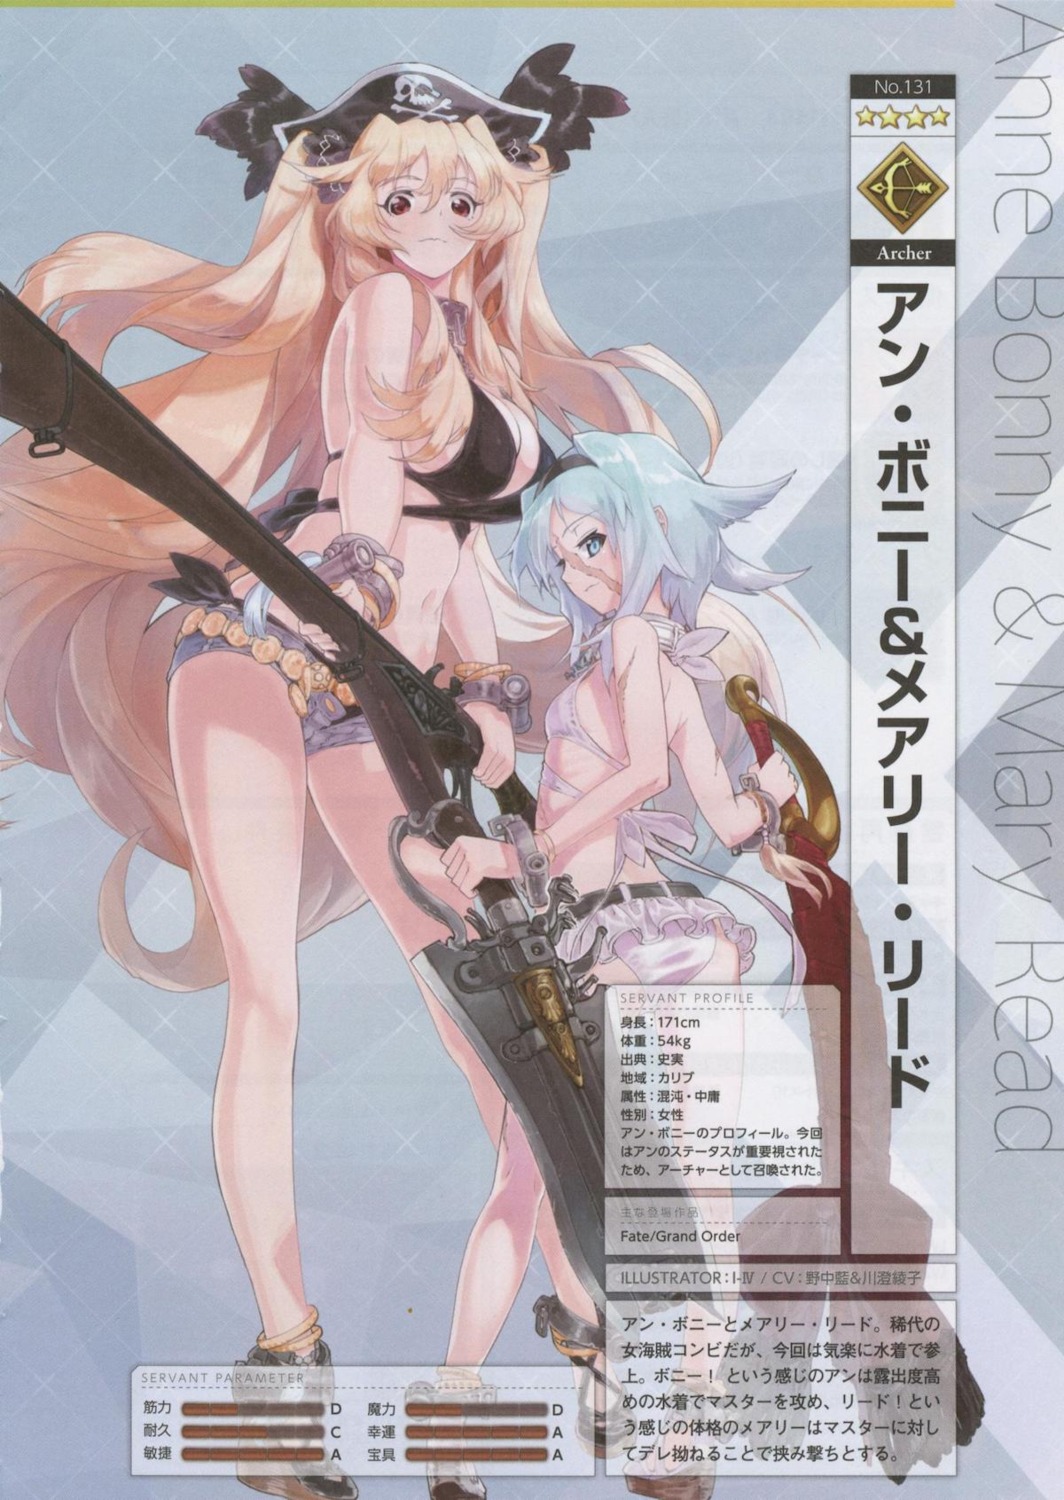 I Iv Fate Grand Order Anne Bonny Fate Grand Order Mary Read Fate Grand Order Ass Bikini Cleavage Gun Heels Profile Page Swimsuits Sword Binding Discoloration Yande Re